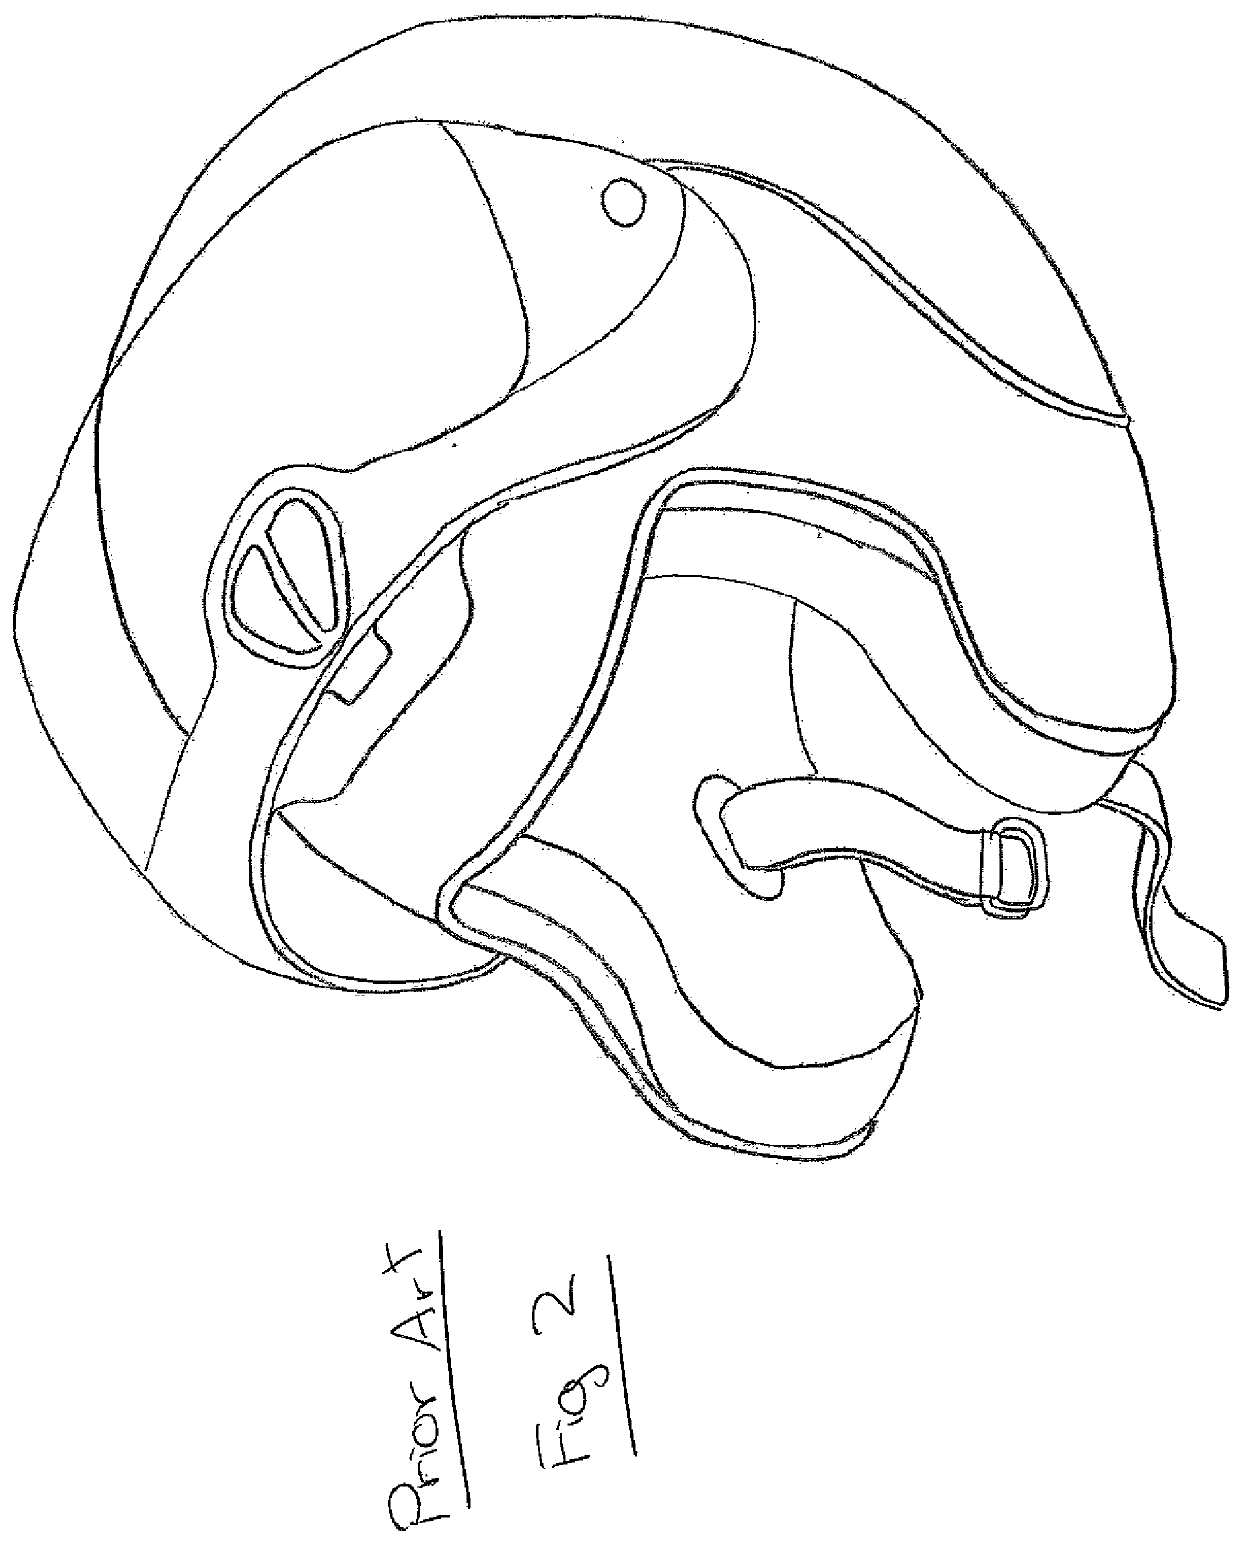 Helmet with cheek pads and method for the use thereof